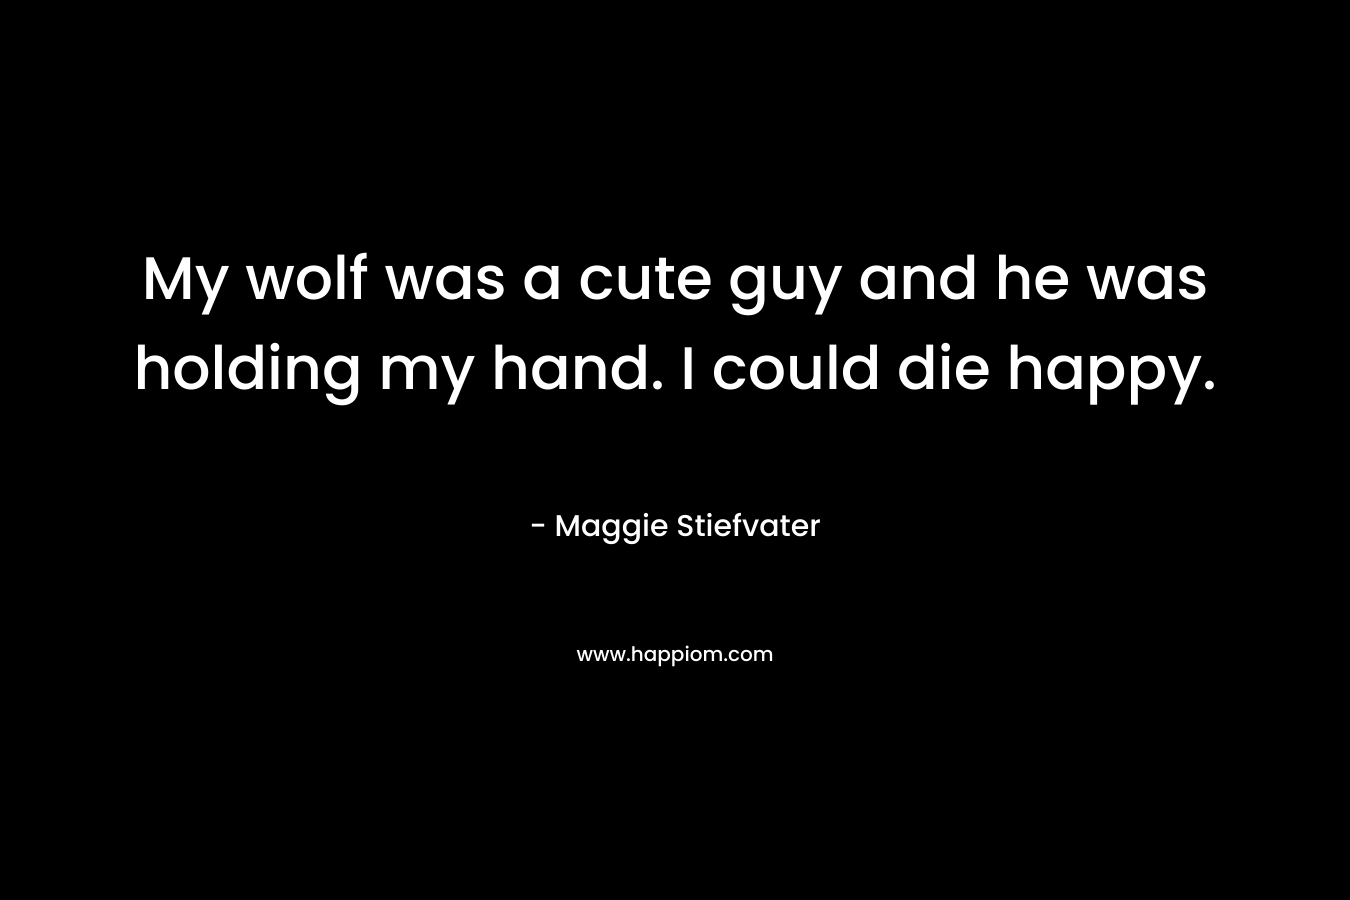 My wolf was a cute guy and he was holding my hand. I could die happy. – Maggie Stiefvater